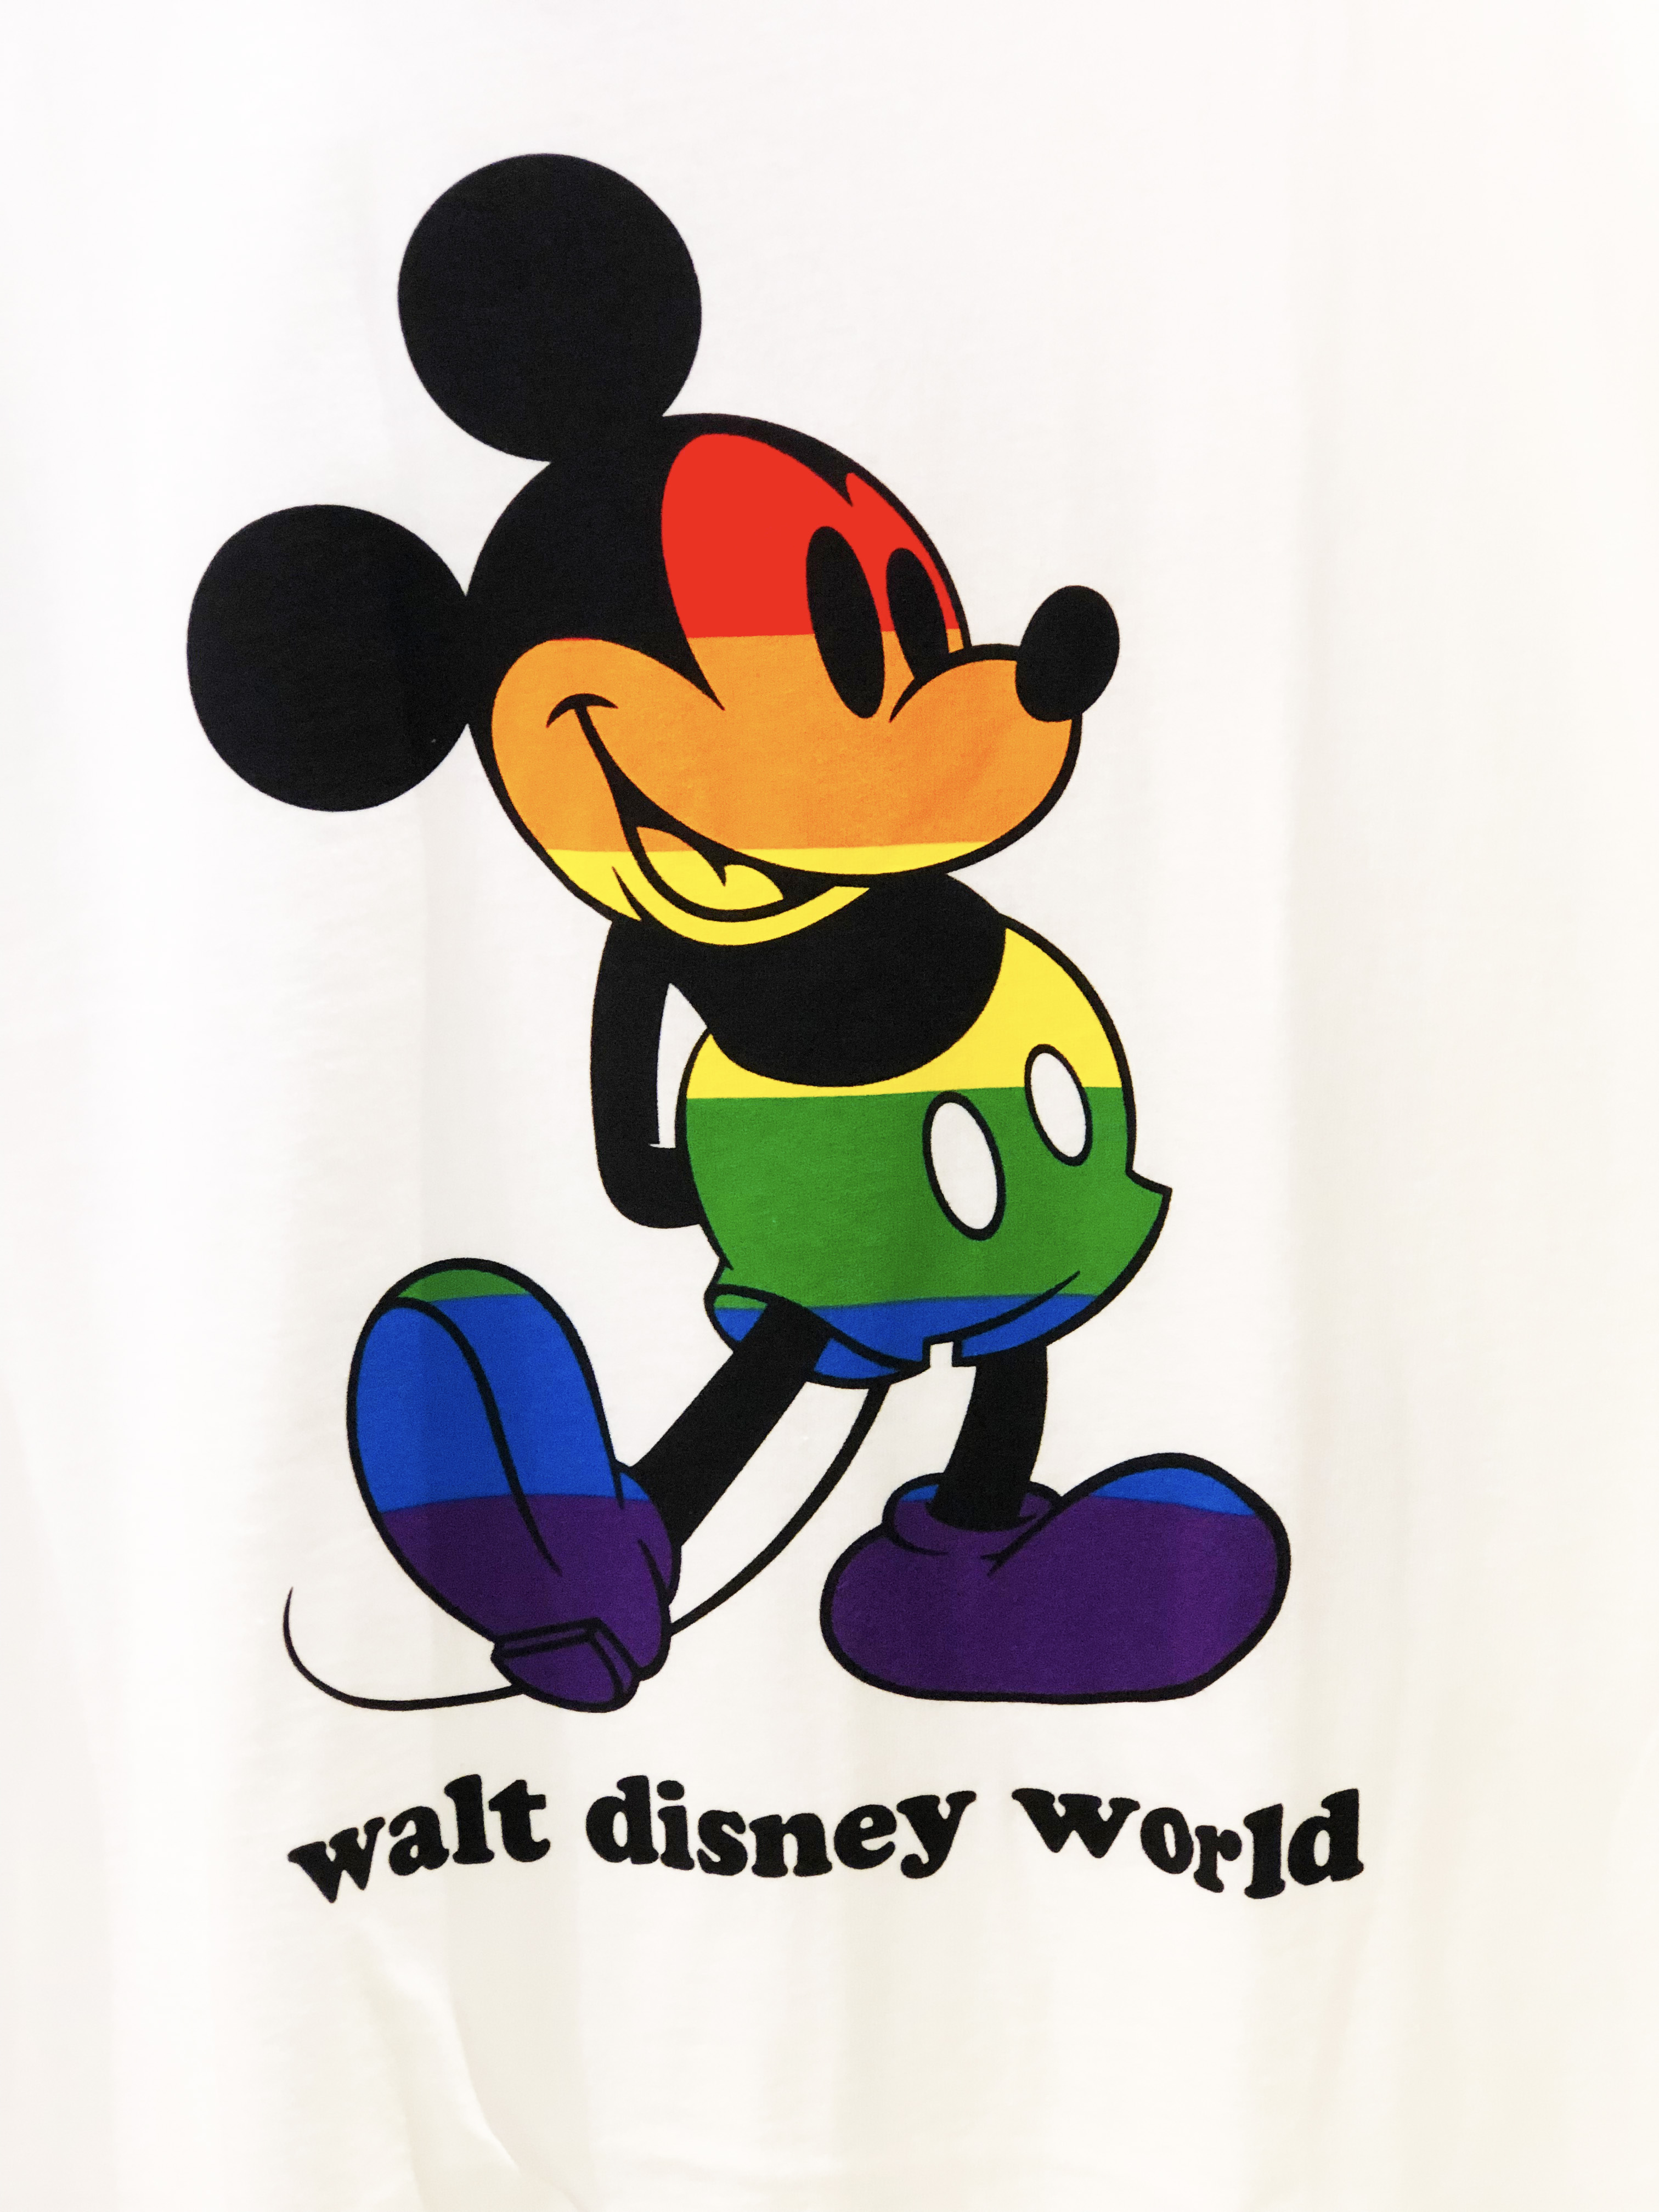 Cropped zoom-in of a white Disney-tee that showcases the classic Mickey posed with one foot out and his hands crossed behind his back. He is colored in a rainbow-stripe pattern with black text that reads "Walt Disney World" below him.